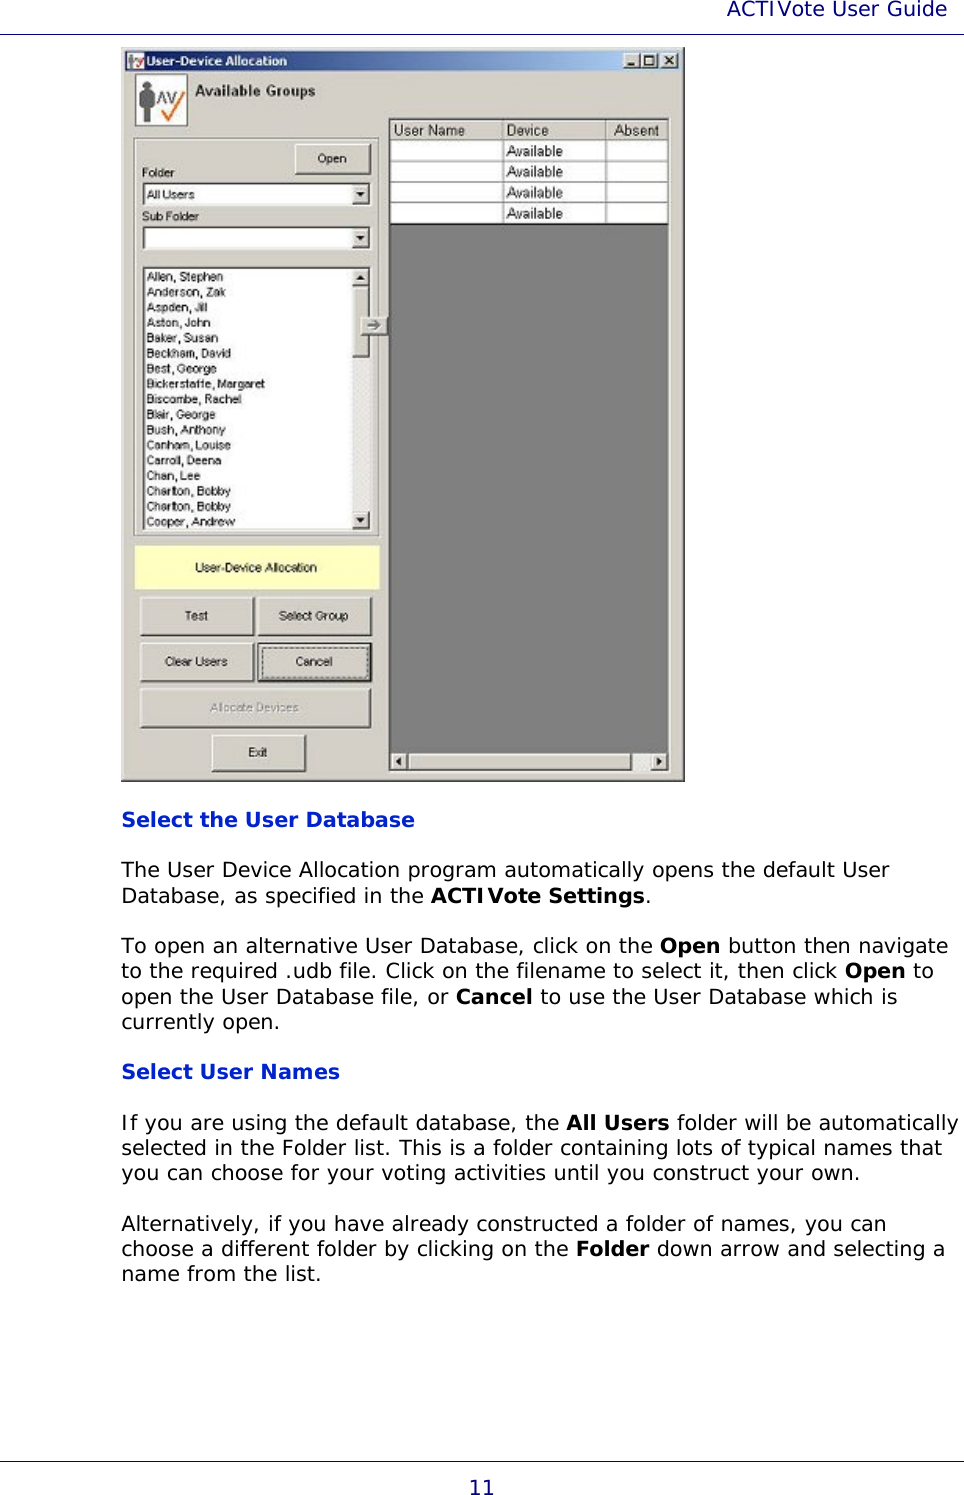 ACTIVote User Guide 11  Select the User Database The User Device Allocation program automatically opens the default User Database, as specified in the ACTIVote Settings. To open an alternative User Database, click on the Open button then navigate to the required .udb file. Click on the filename to select it, then click Open to open the User Database file, or Cancel to use the User Database which is currently open. Select User Names If you are using the default database, the All Users folder will be automatically selected in the Folder list. This is a folder containing lots of typical names that you can choose for your voting activities until you construct your own. Alternatively, if you have already constructed a folder of names, you can choose a different folder by clicking on the Folder down arrow and selecting a name from the list. 